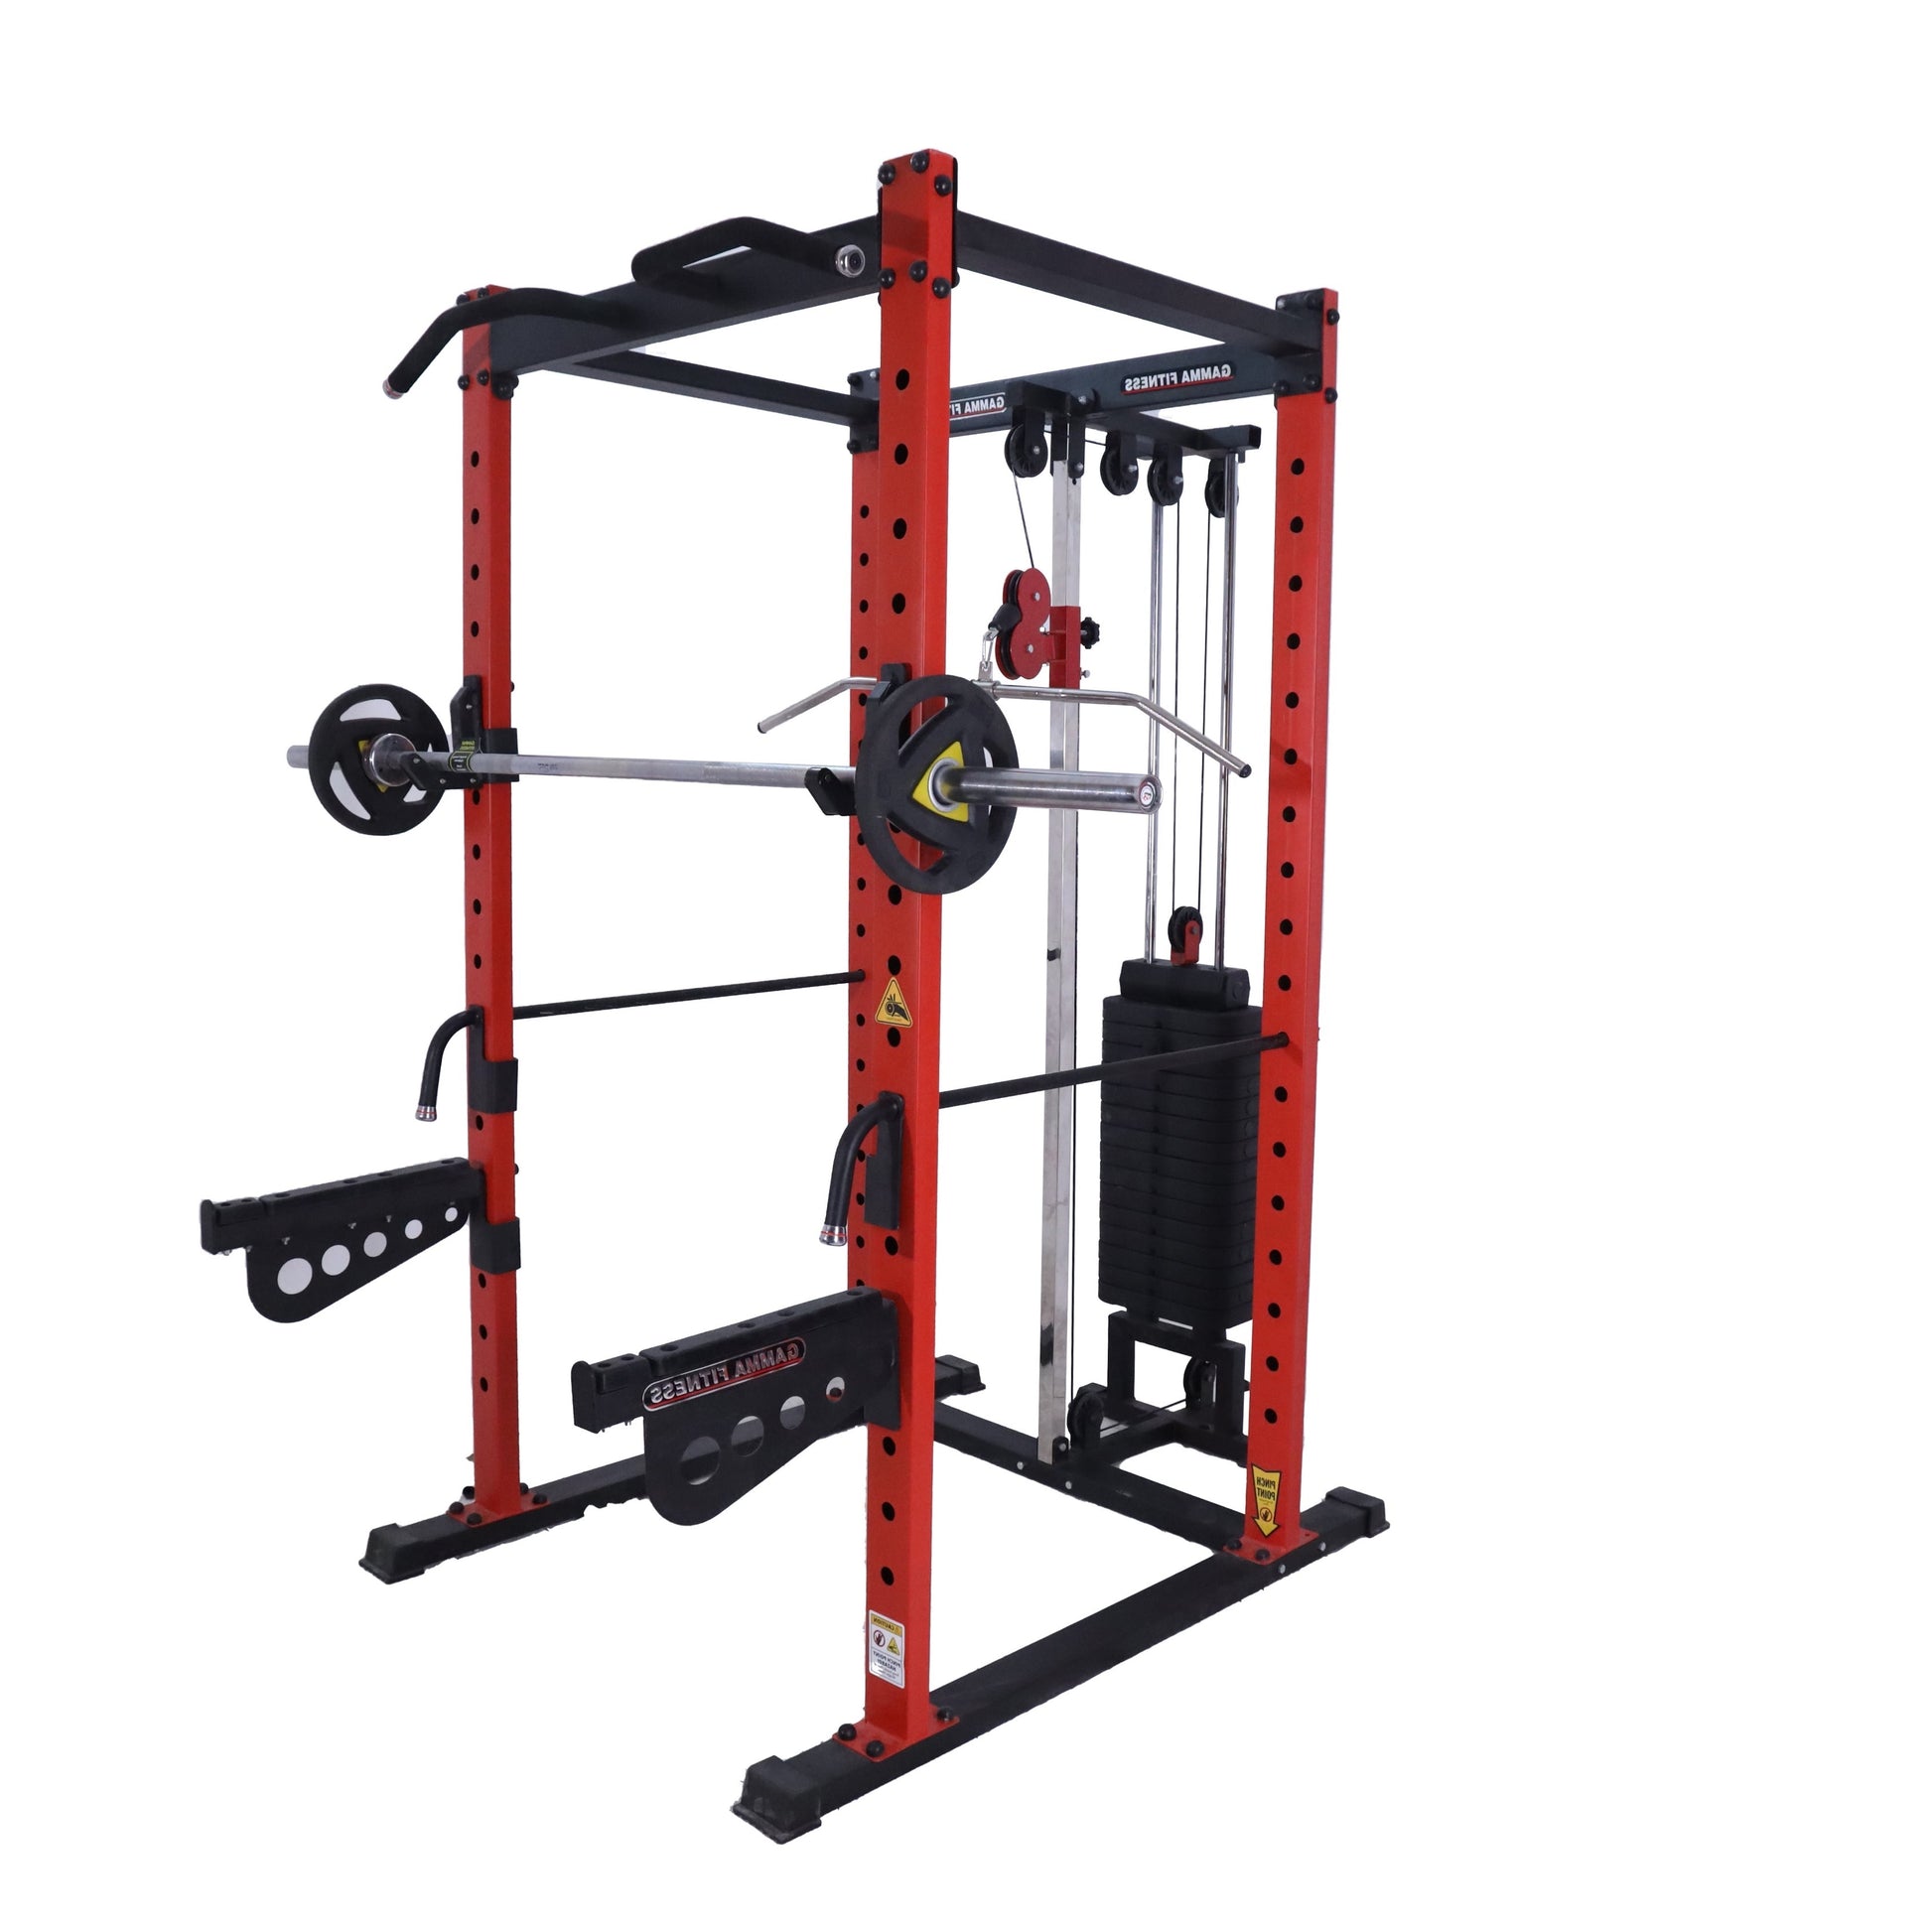 GAMMA FITNESS Power Squat Rack with Cable Crossover, Lats Pull Down and Rowing PR-22 in 4 x 2 inches Commercial Frame with Weight Stack